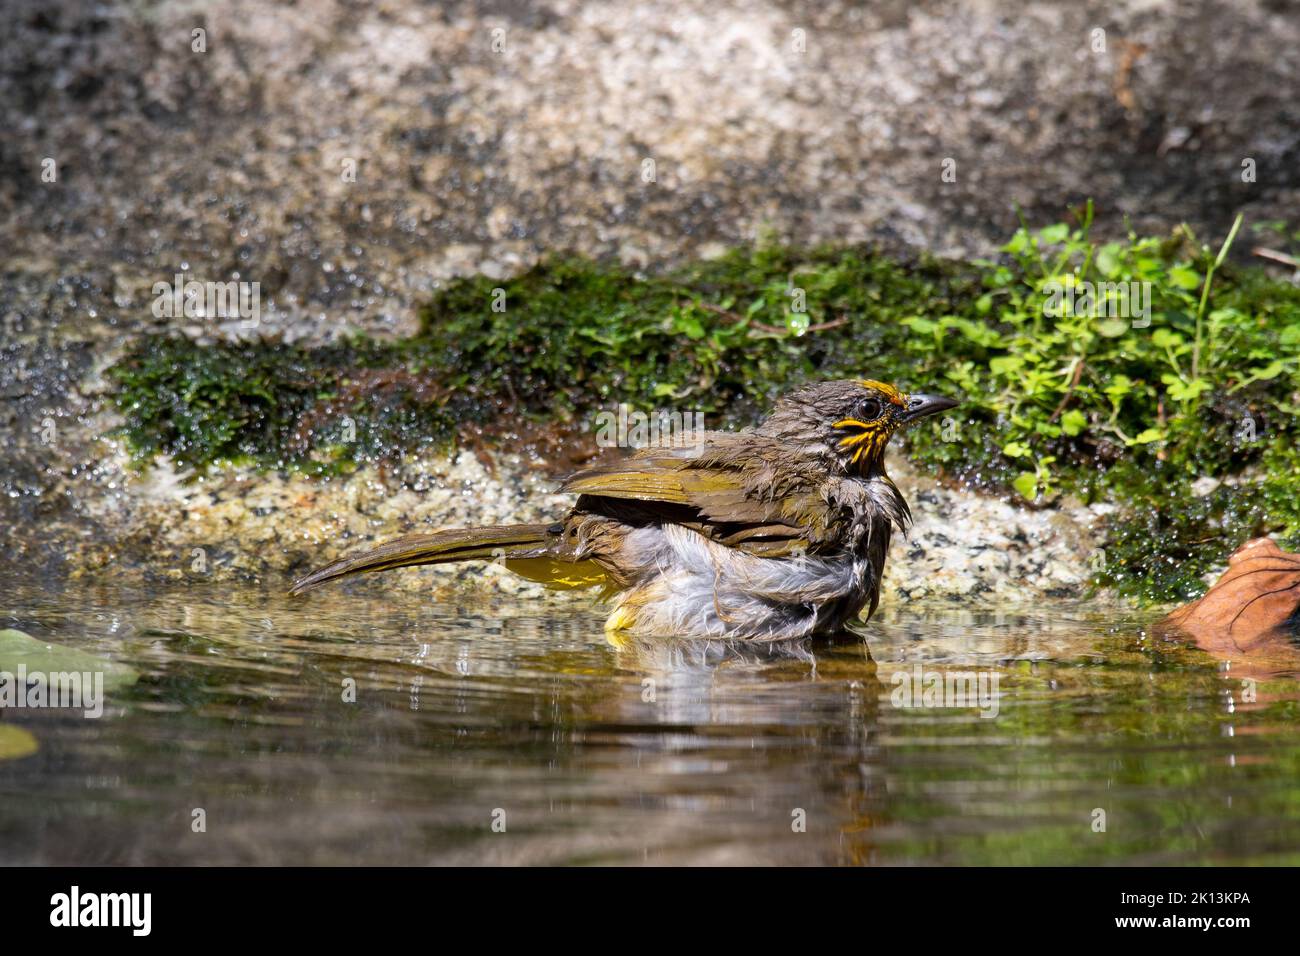 Seen taking a bath during a hot summer day in the forest, Stripe-throated Bulbul Pycnonotus finlaysoni, Thailand. Stock Photo